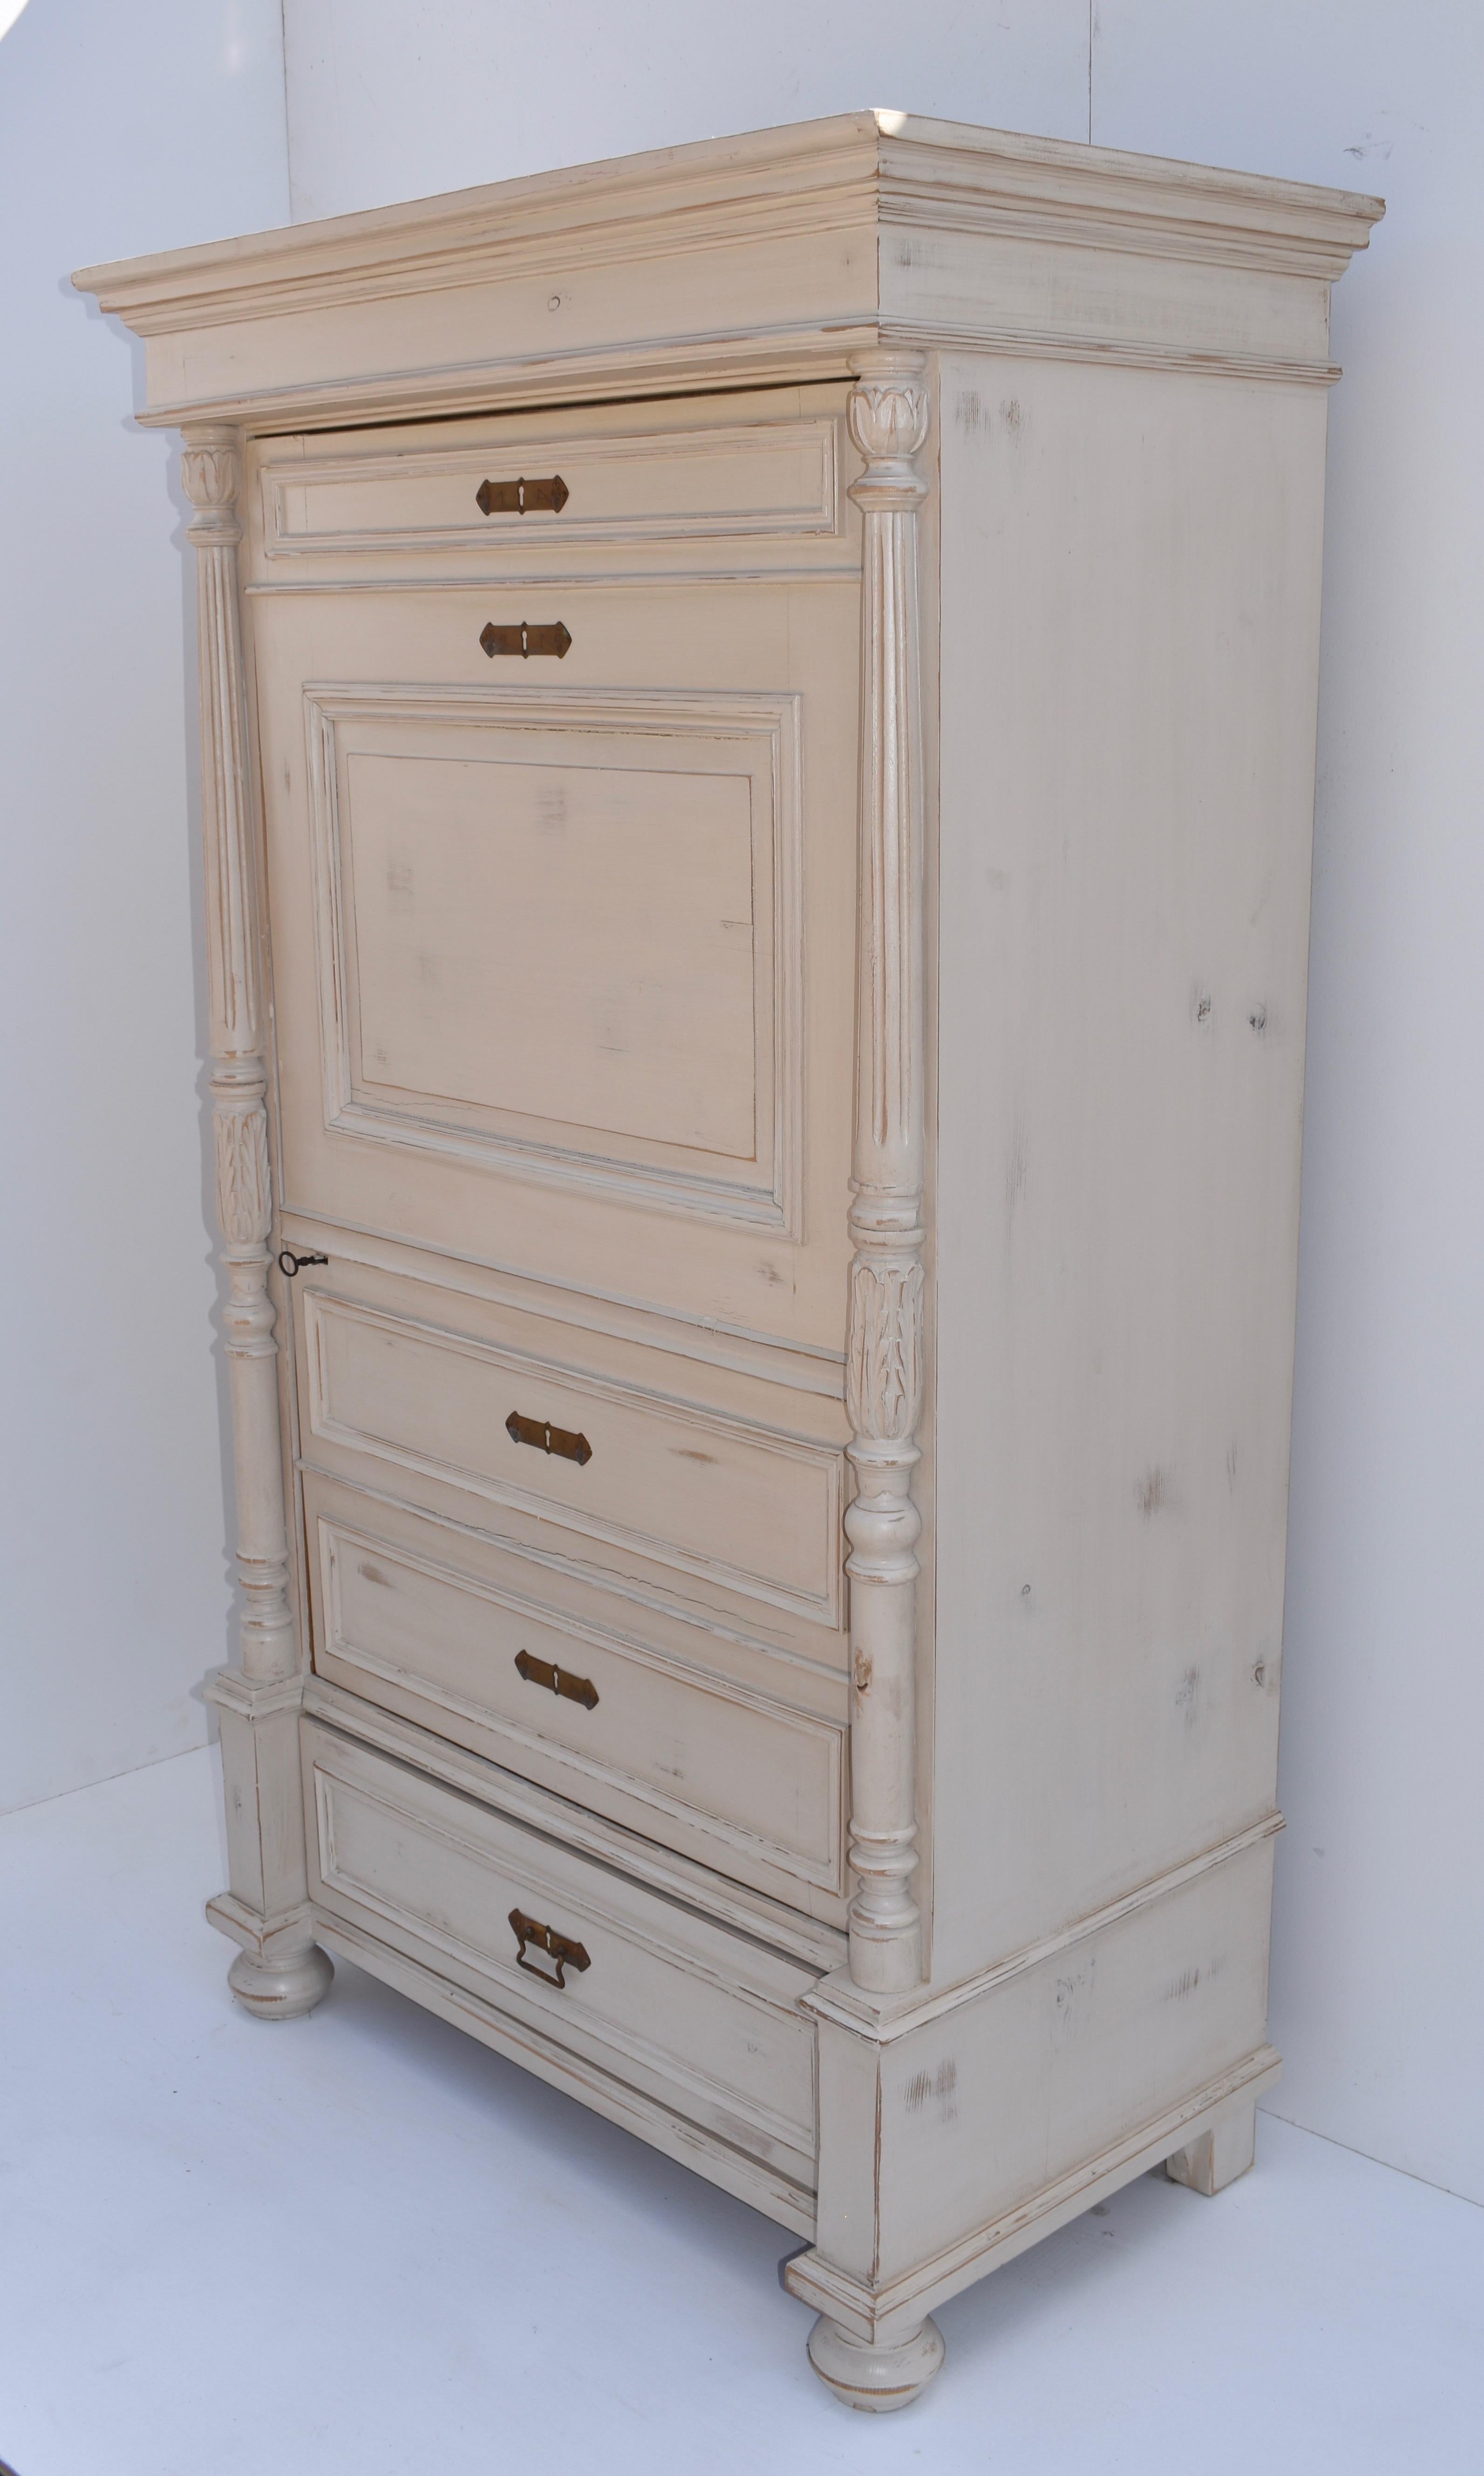 This interesting single door wardrobe presents as a fall-front secretaire, with the panels on the door suggesting a desk top with a drawer above and two beneath. There is a real handcut dovetailed drawer beneath the door and the full fluted columns